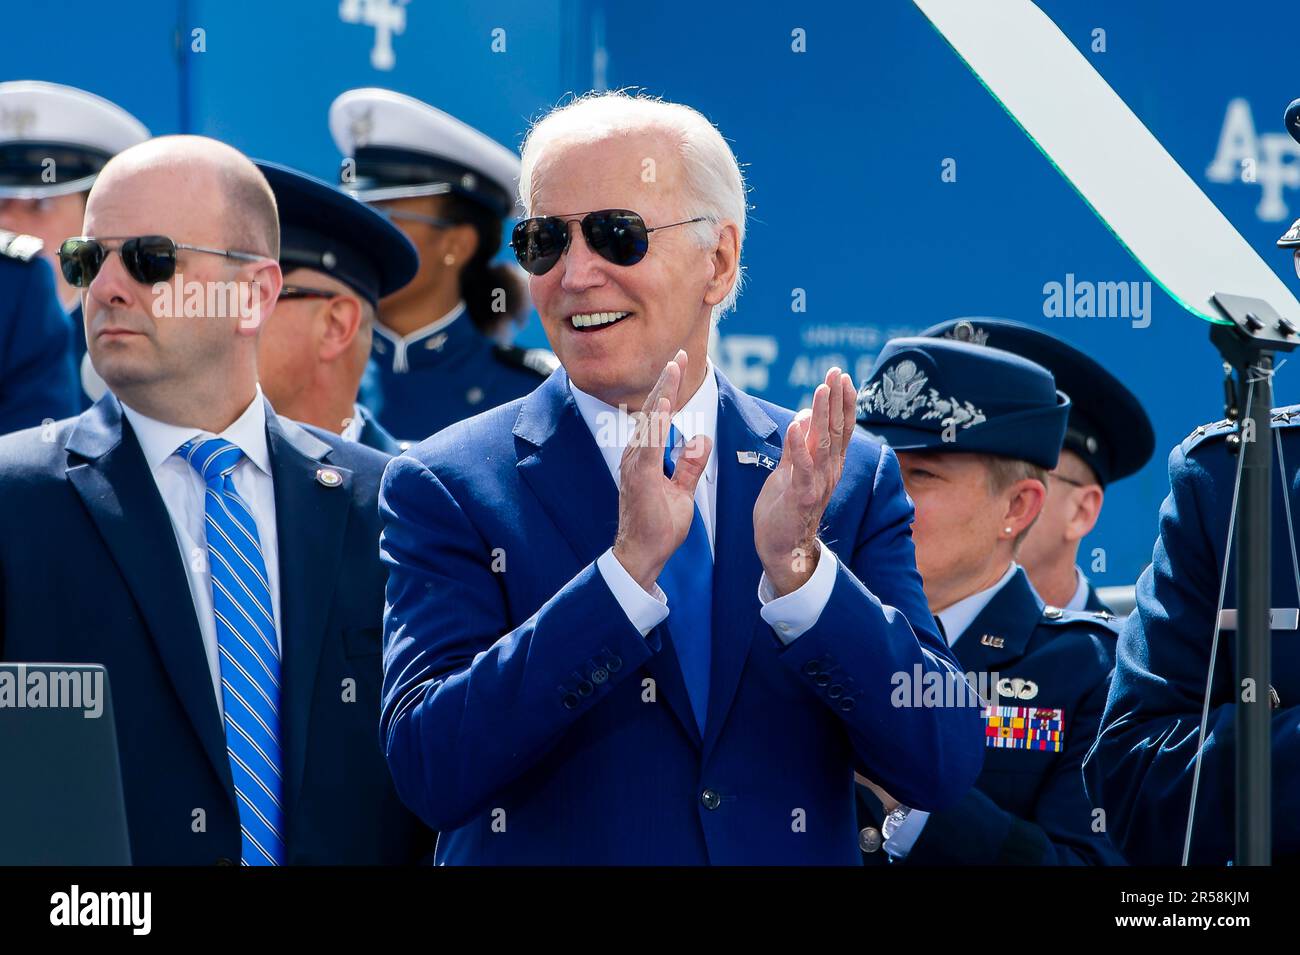 Colorado Springs, United States of America. 01 June, 2023. U.S President Joe Biden applauds during the commencement ceremony for the United States Air Force Academy graduating cadets at Falcon Stadium, June 1, 2023 in Colorado Springs, Colorado. Credit: Justin Pacheco/U.S. Air Force Photo/Alamy Live News Stock Photo